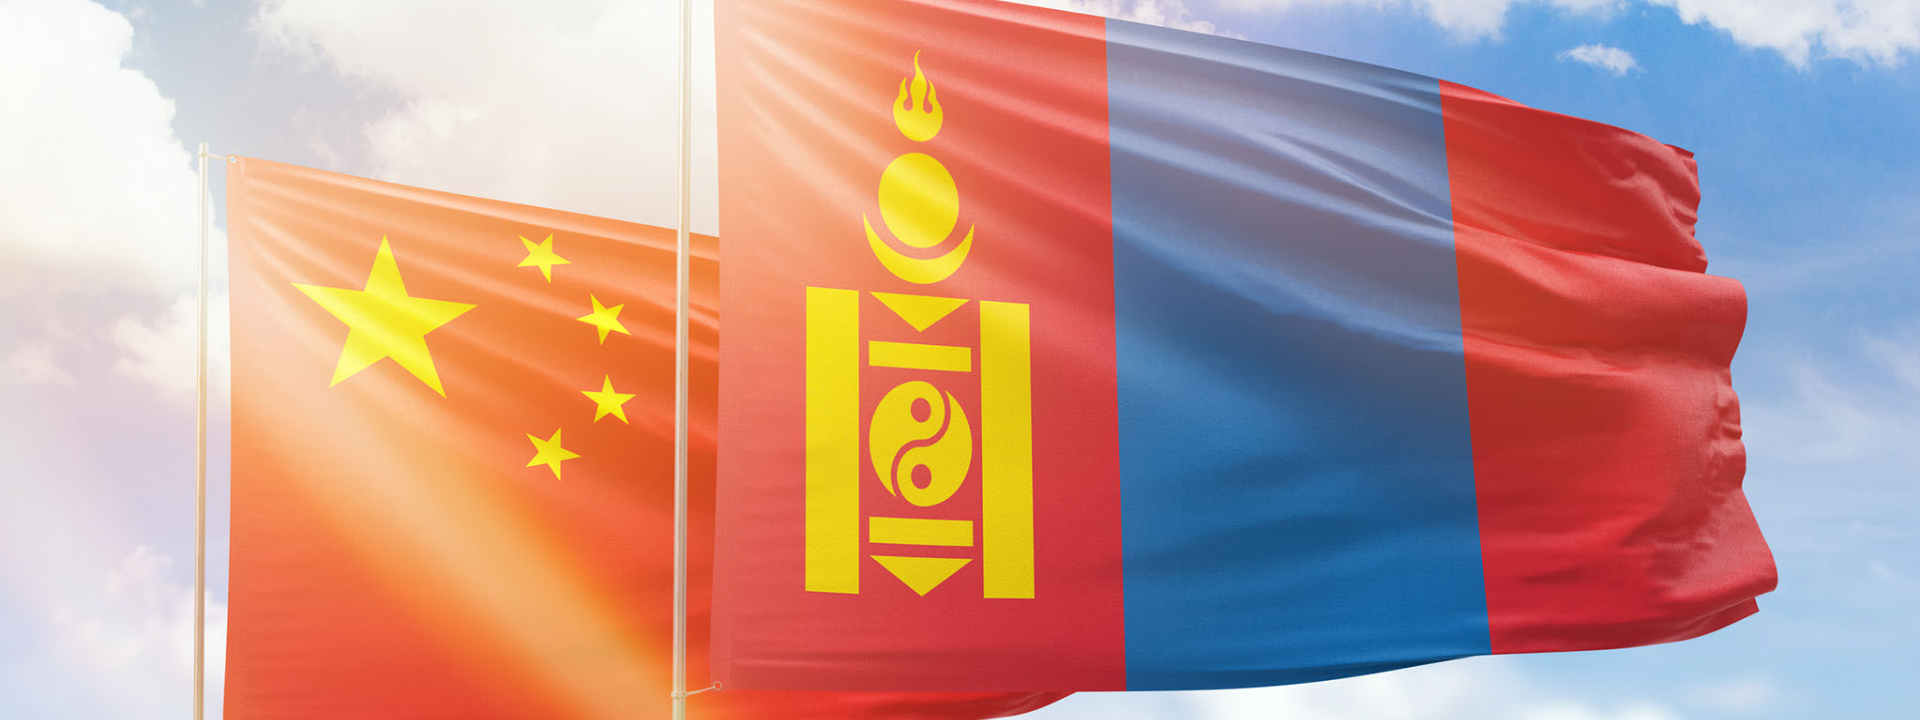 Mongolia Aims for ‘New Heights’ in Relations With China by C. Sumiya